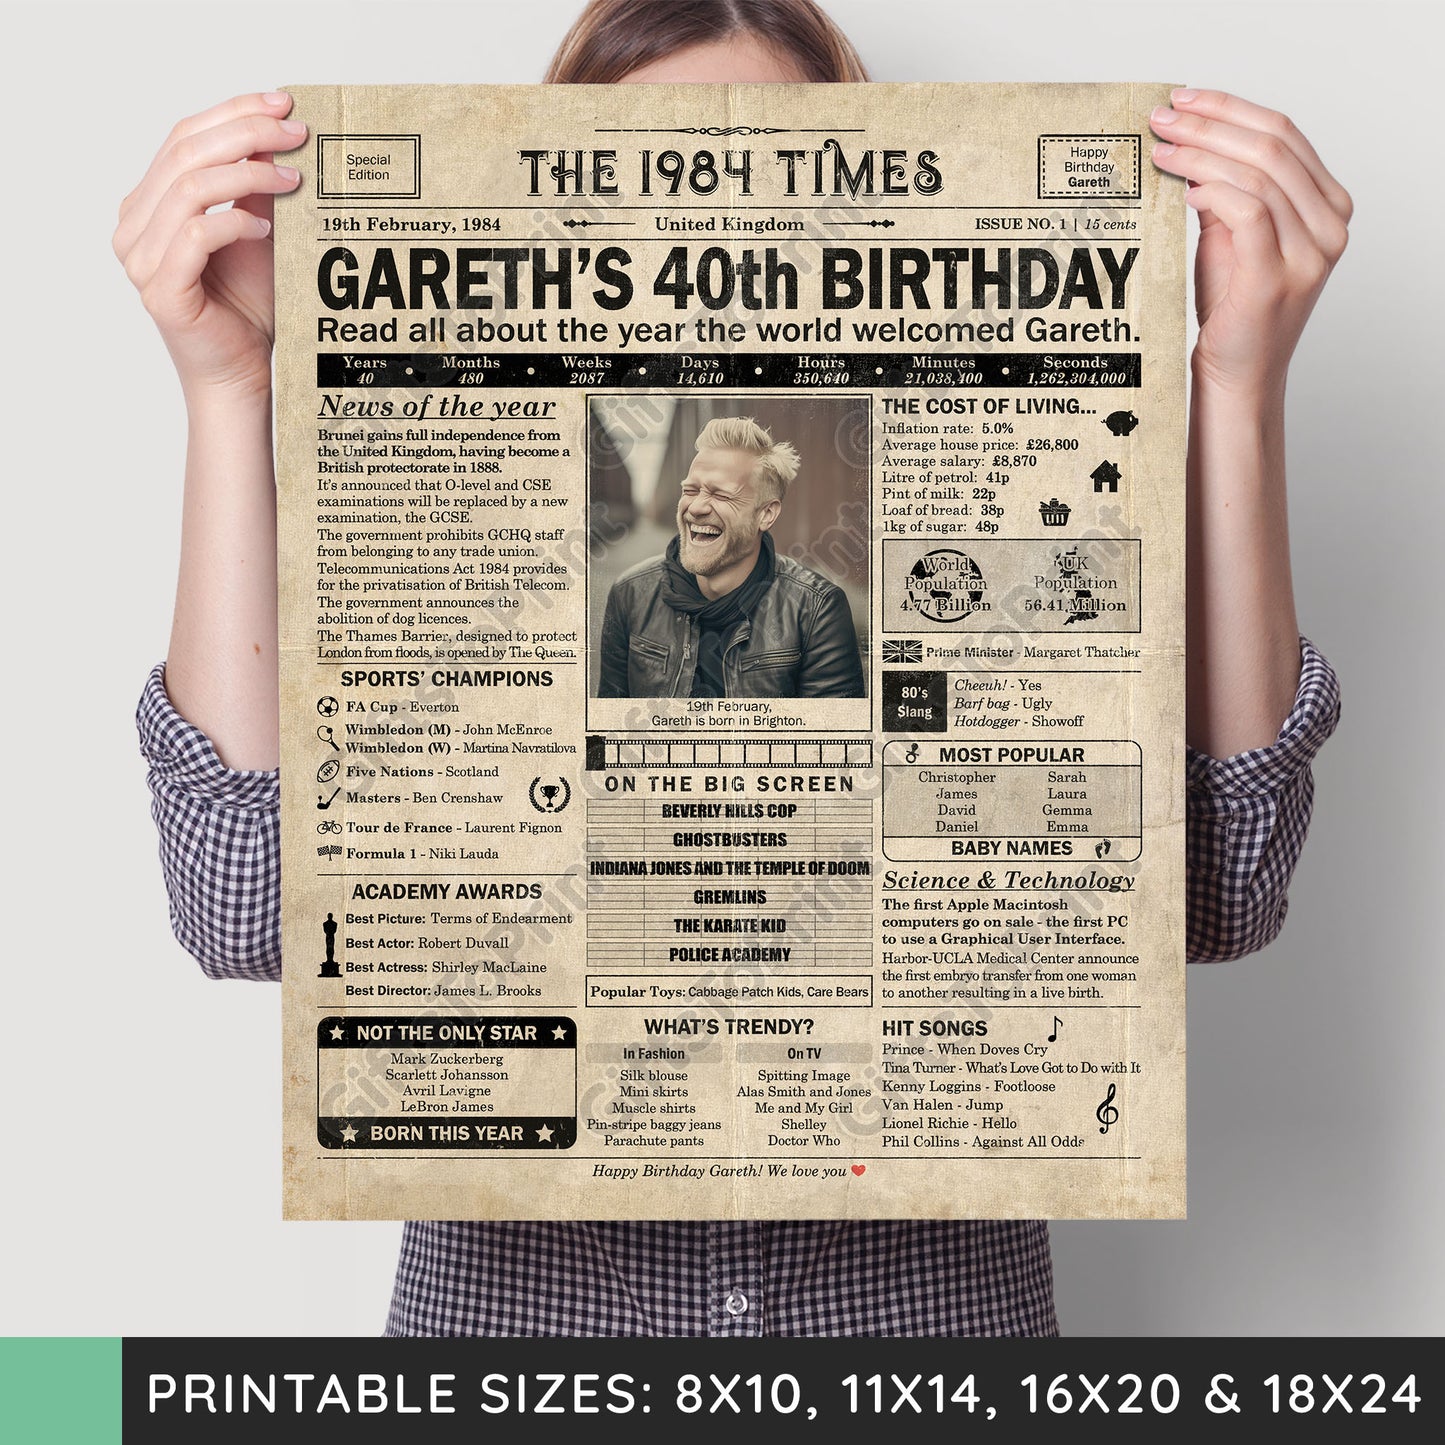 Personalised 40th Birthday Gift: A Printable UK Birthday Poster of 1984